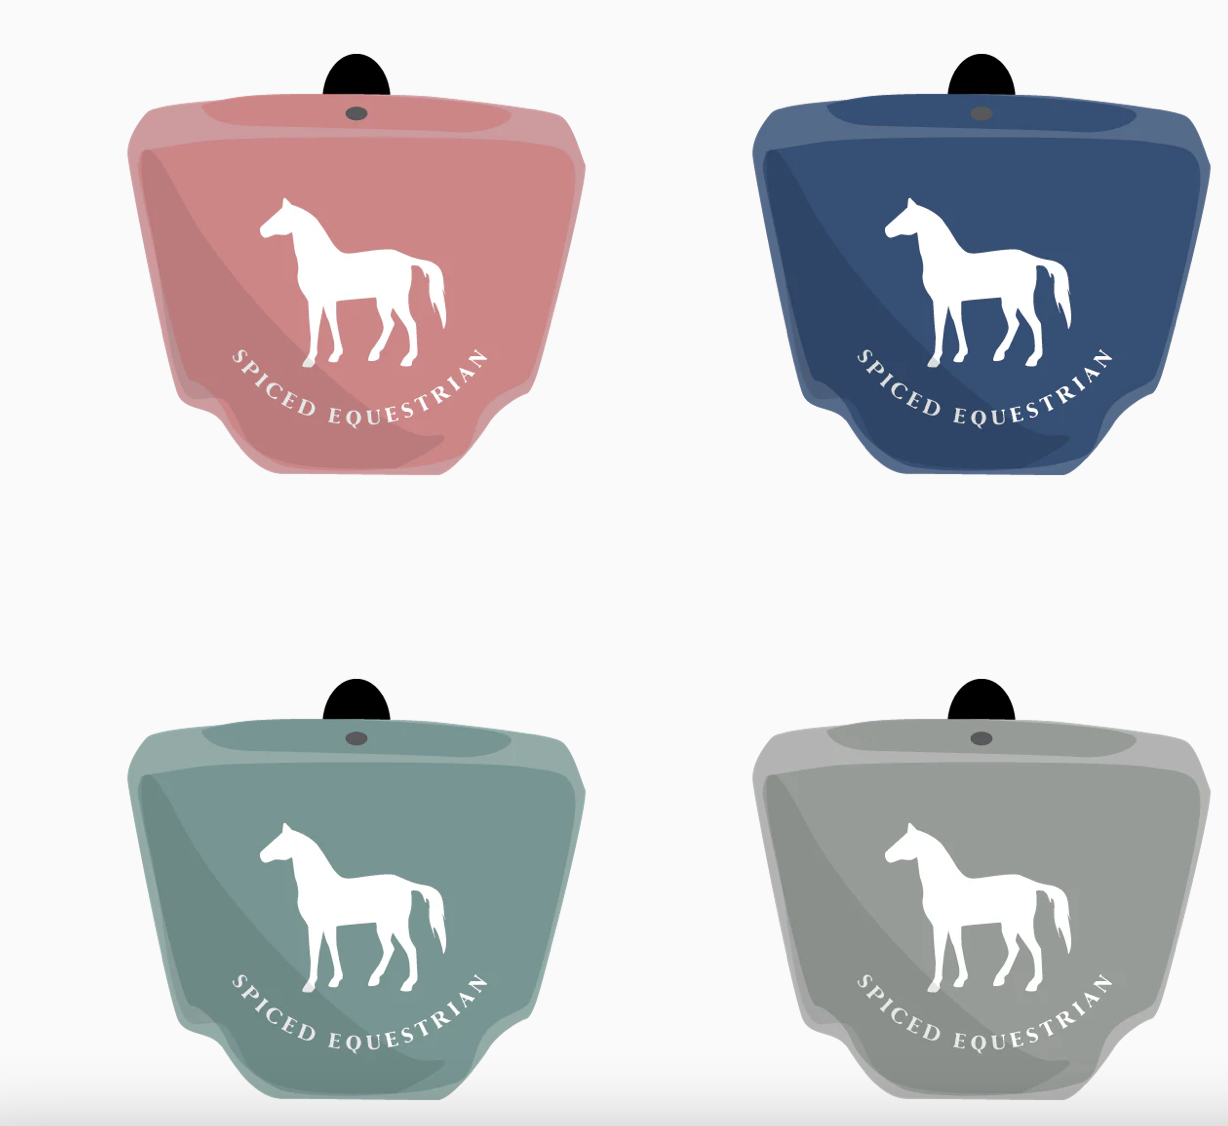 The Spiced Equestrian Treat Pouch